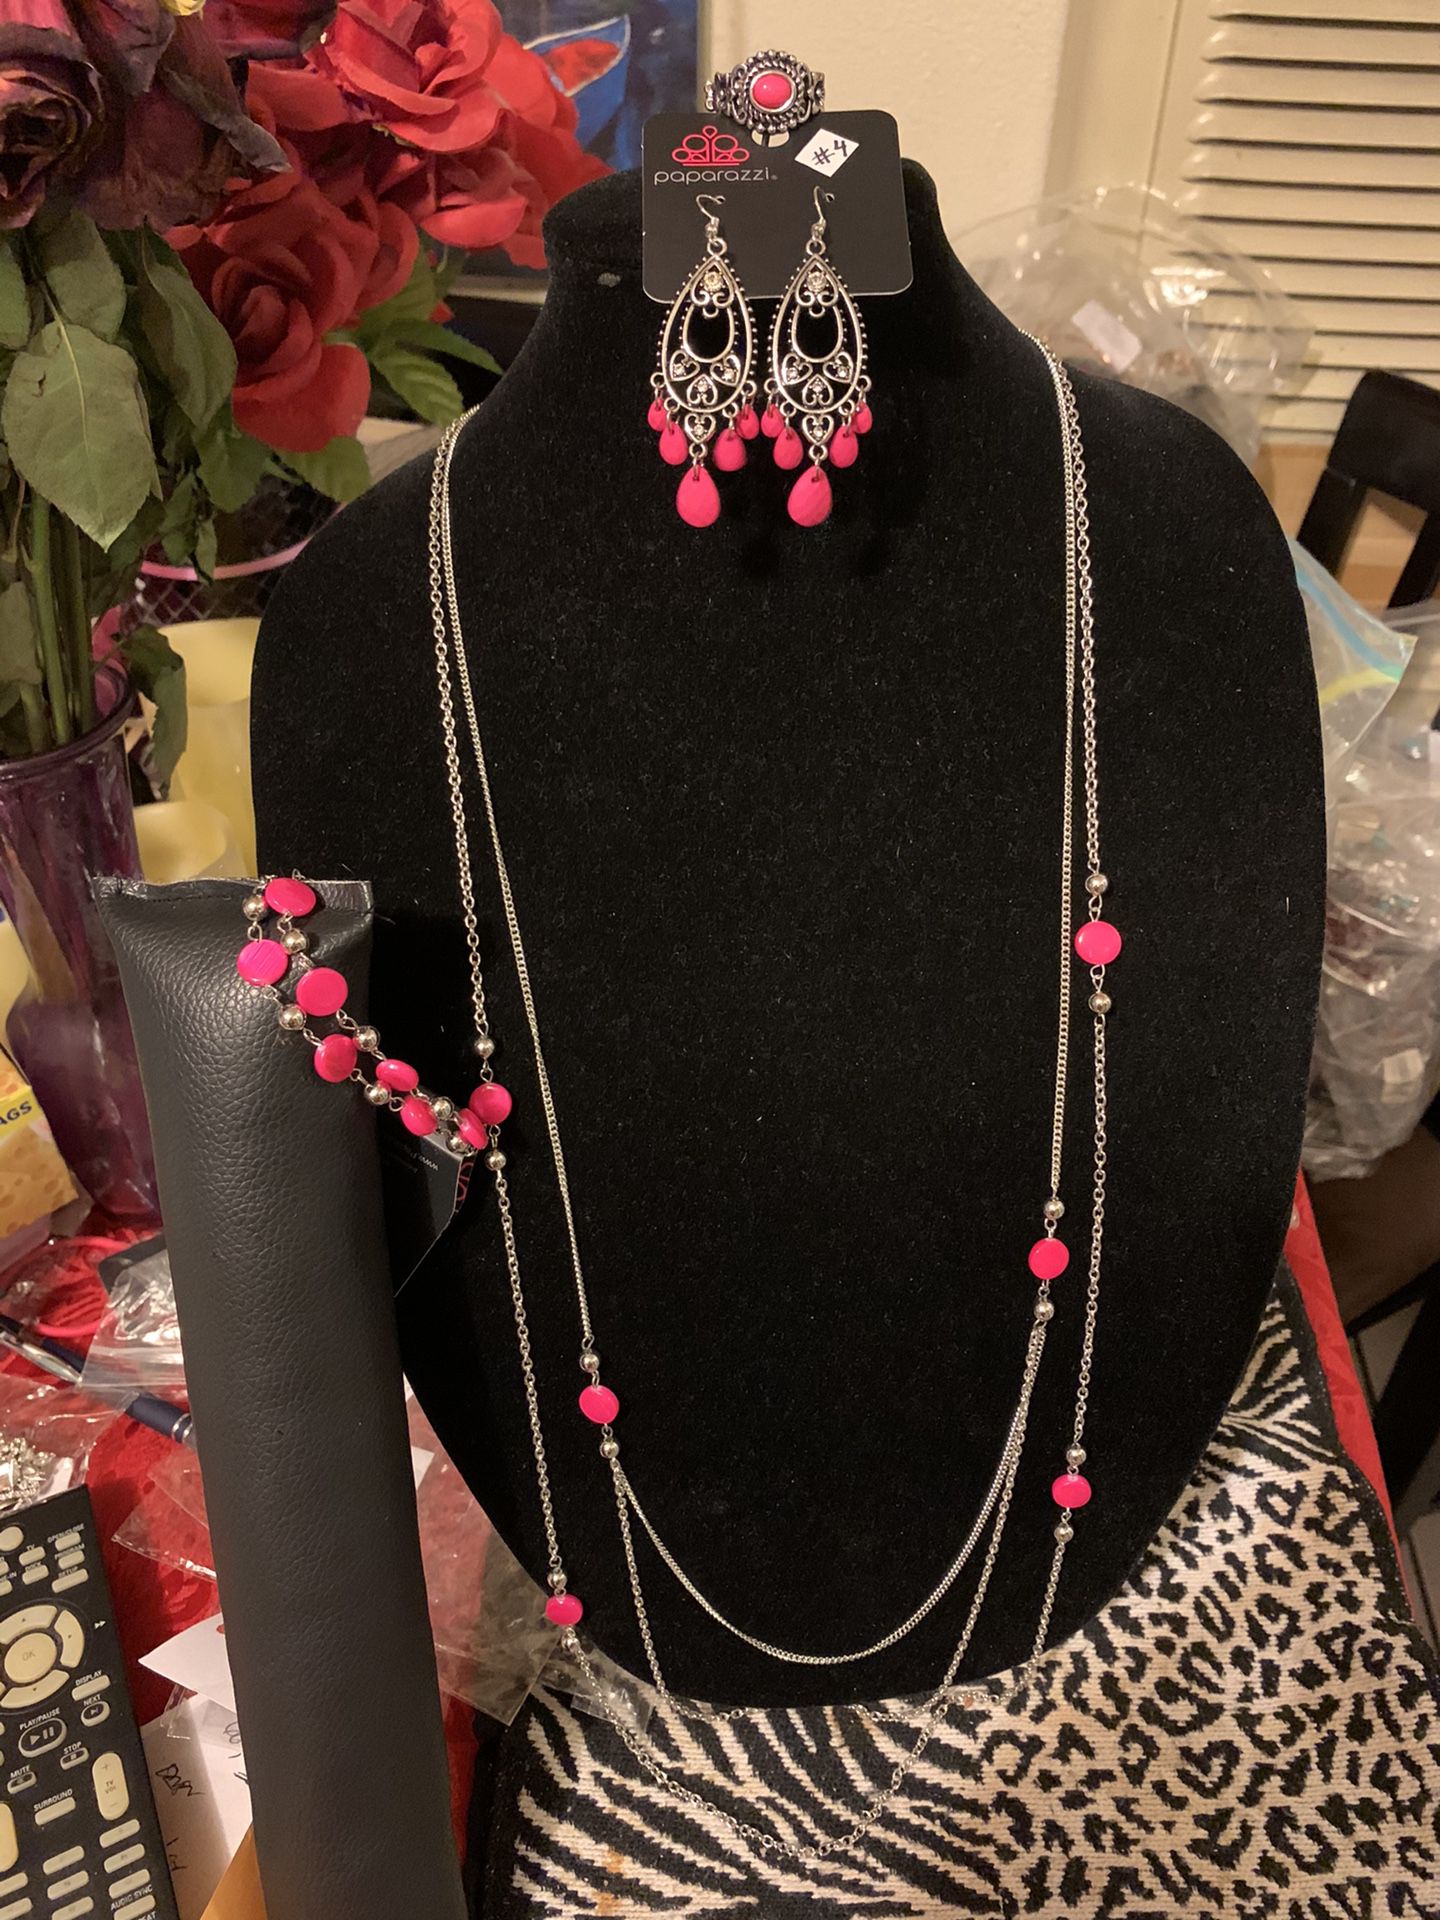 New 4pc jewelry set color silver and hot pink